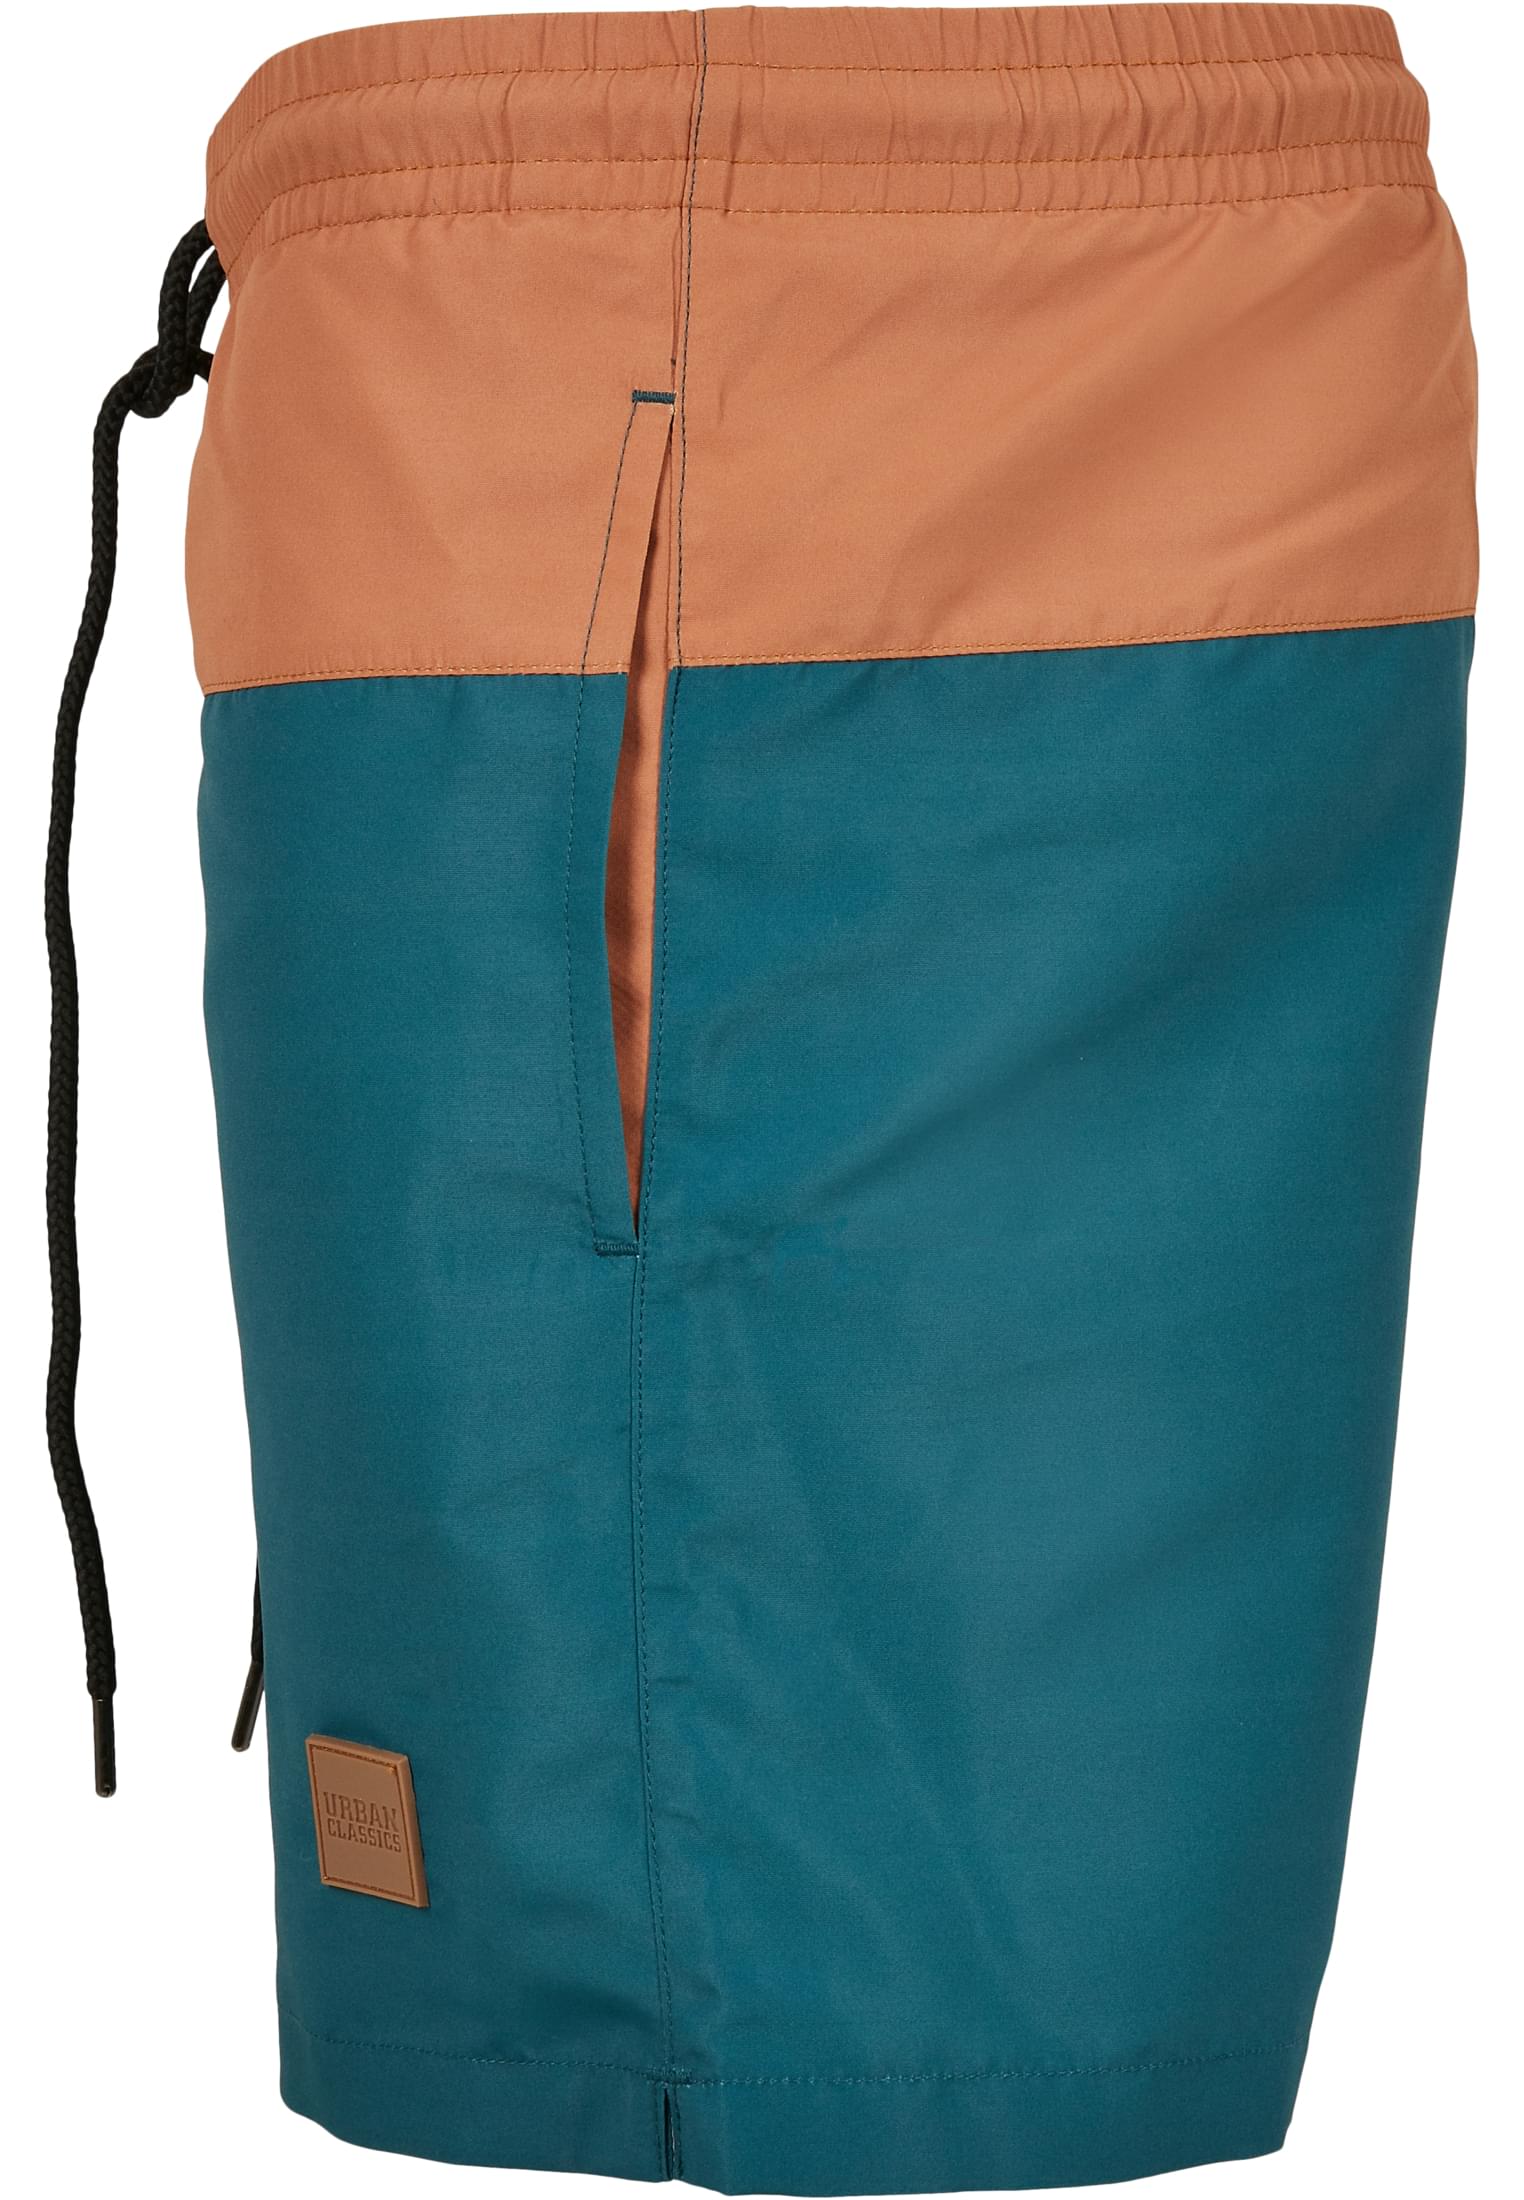 Plus Size Block Swim Shorts in Farbe teal/toffee